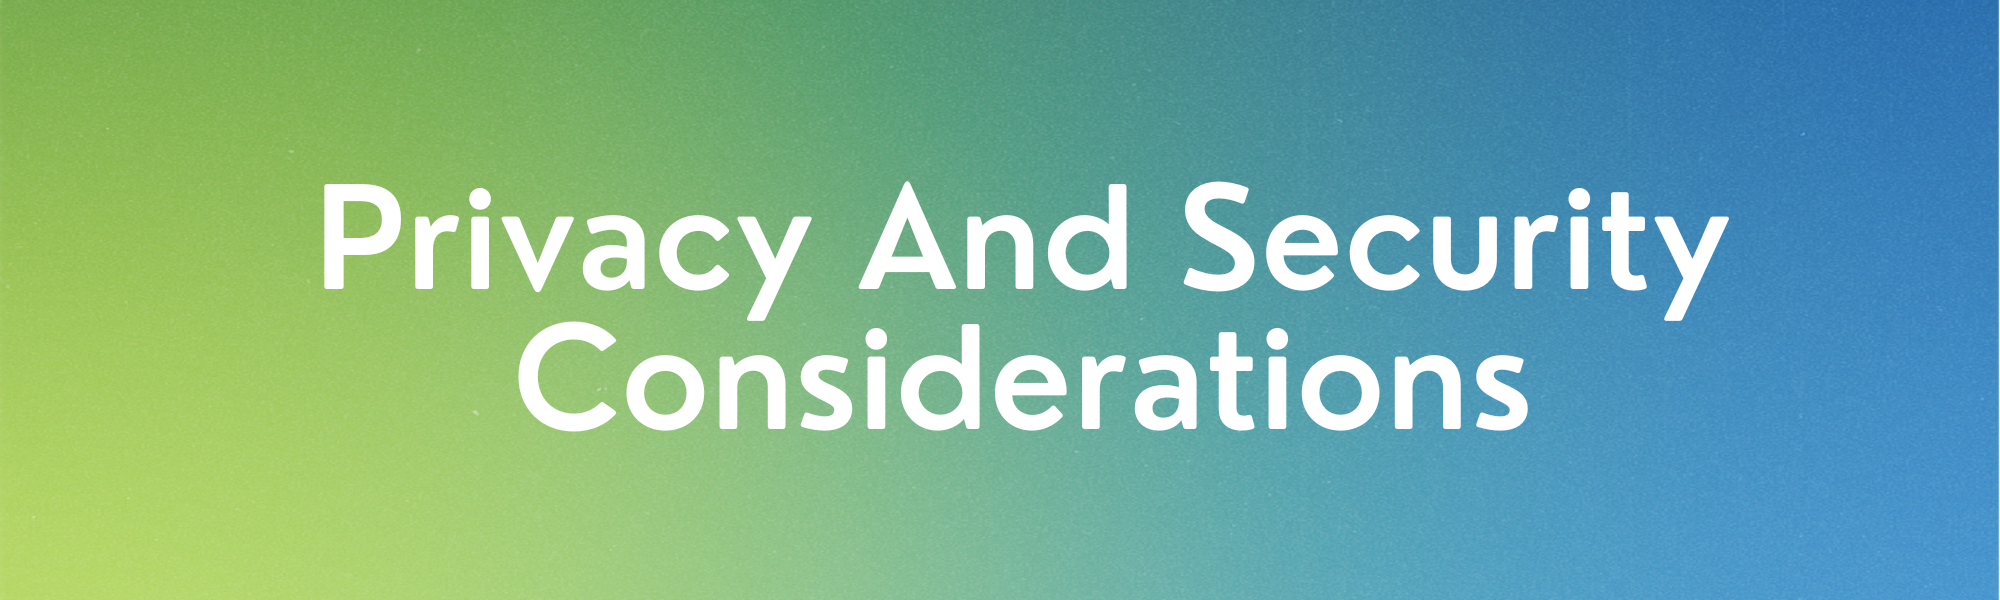 Privacy And Security Considerations